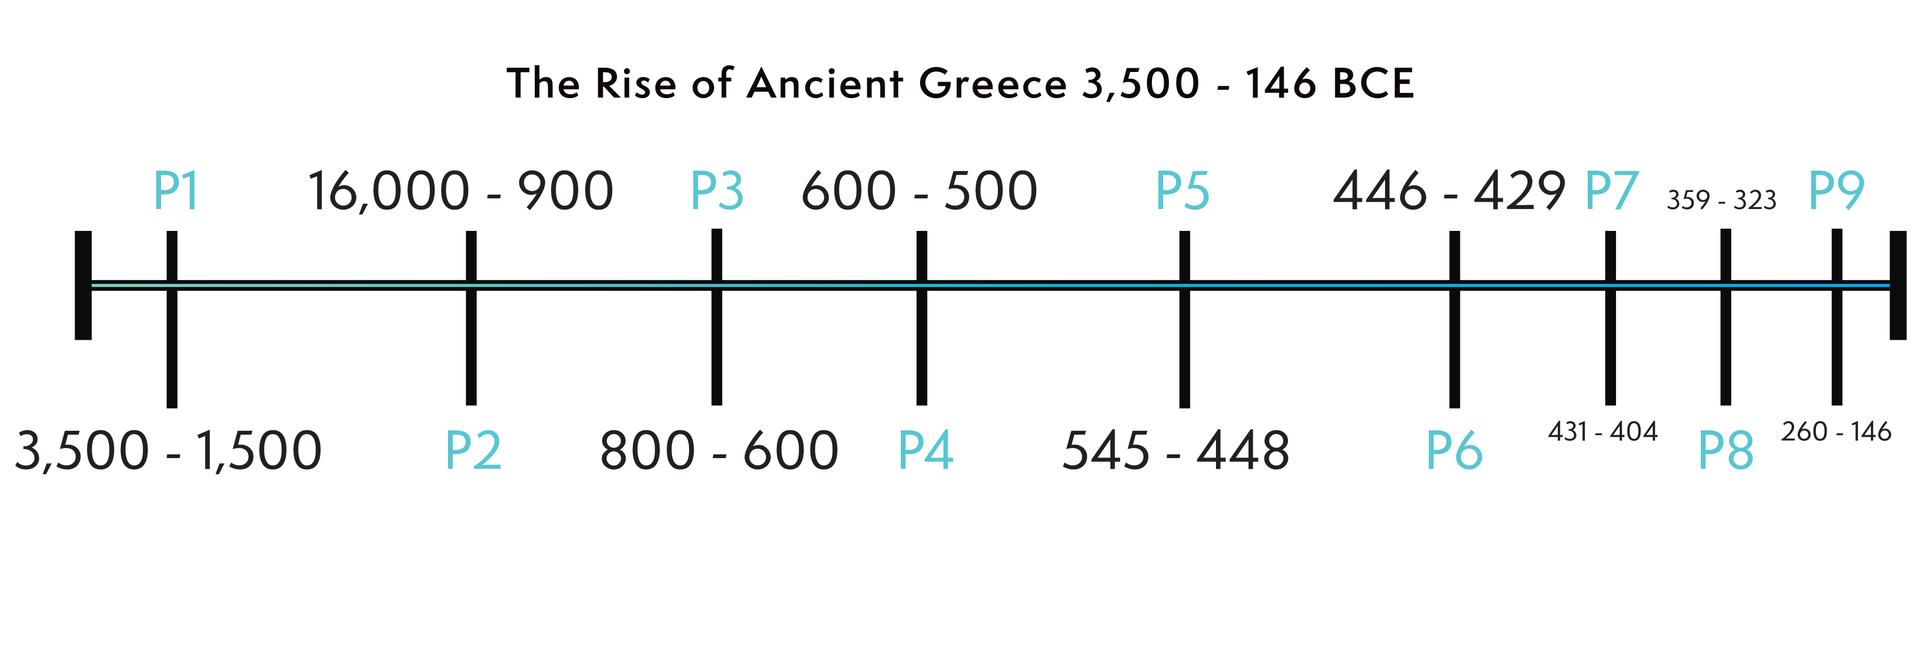 The rise of Greece- a time line.